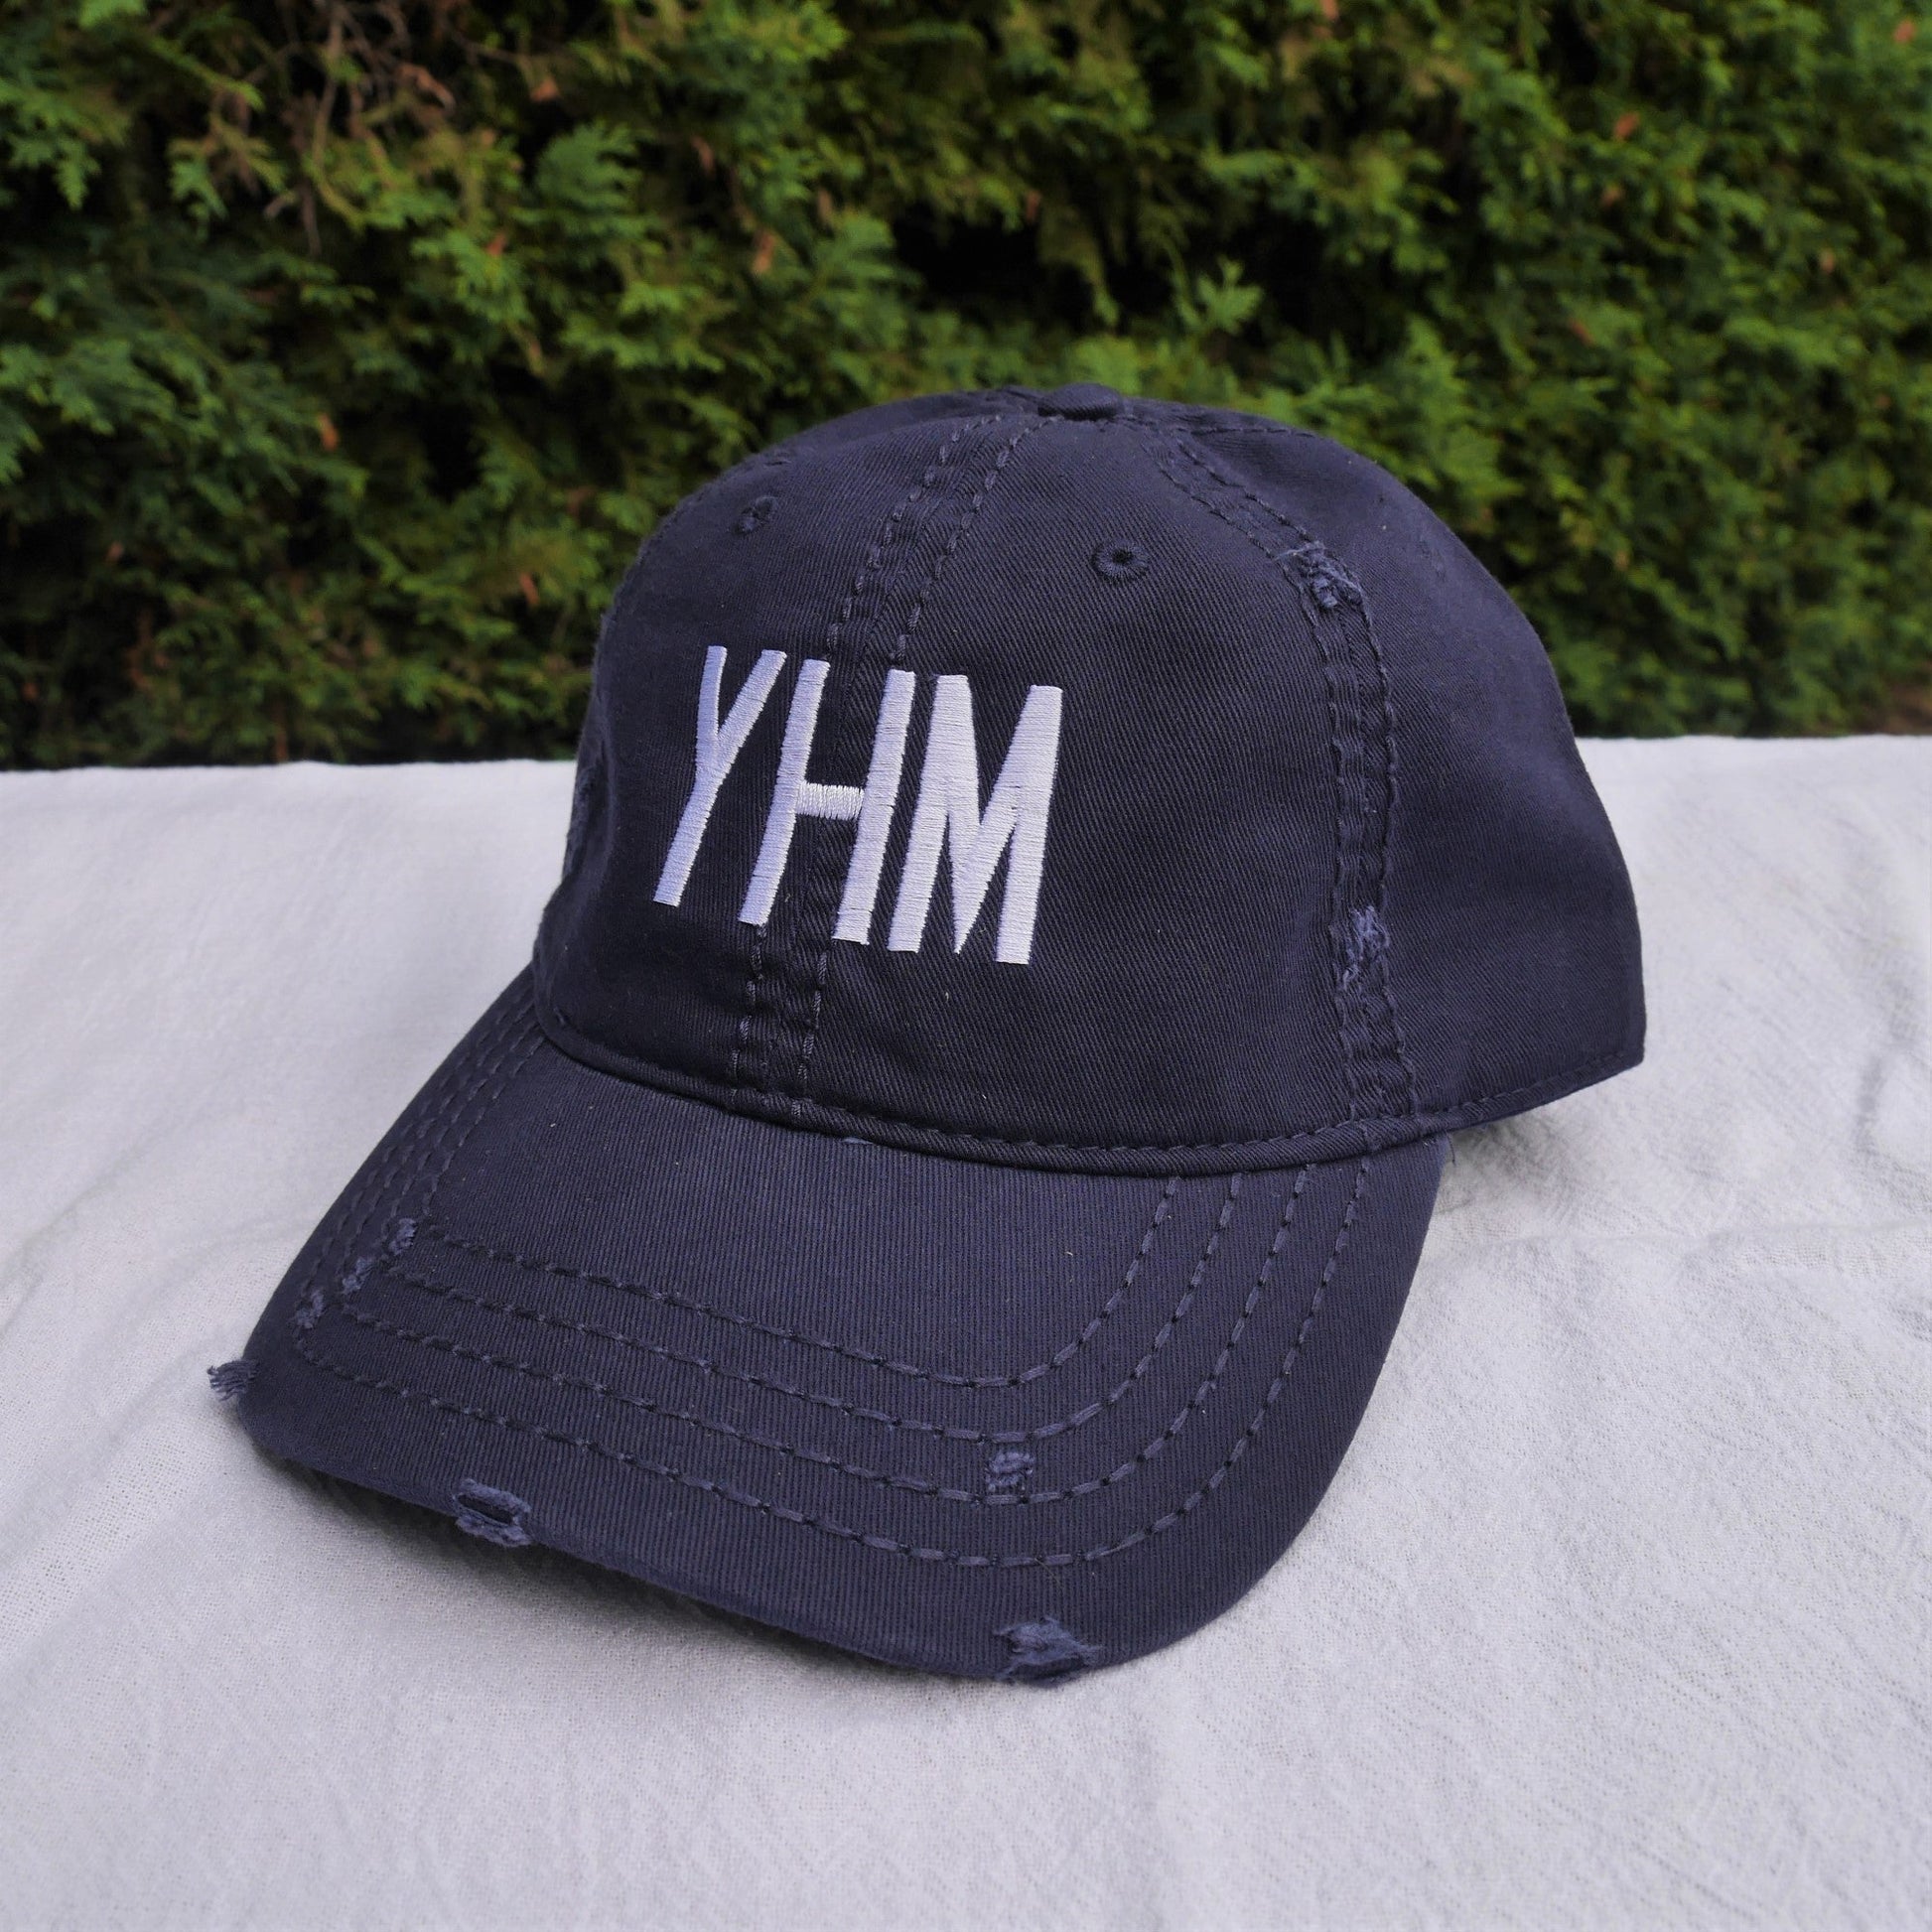 Airport Code Twill Cap - White • EZE Buenos Aires • YHM Designs - Image 34